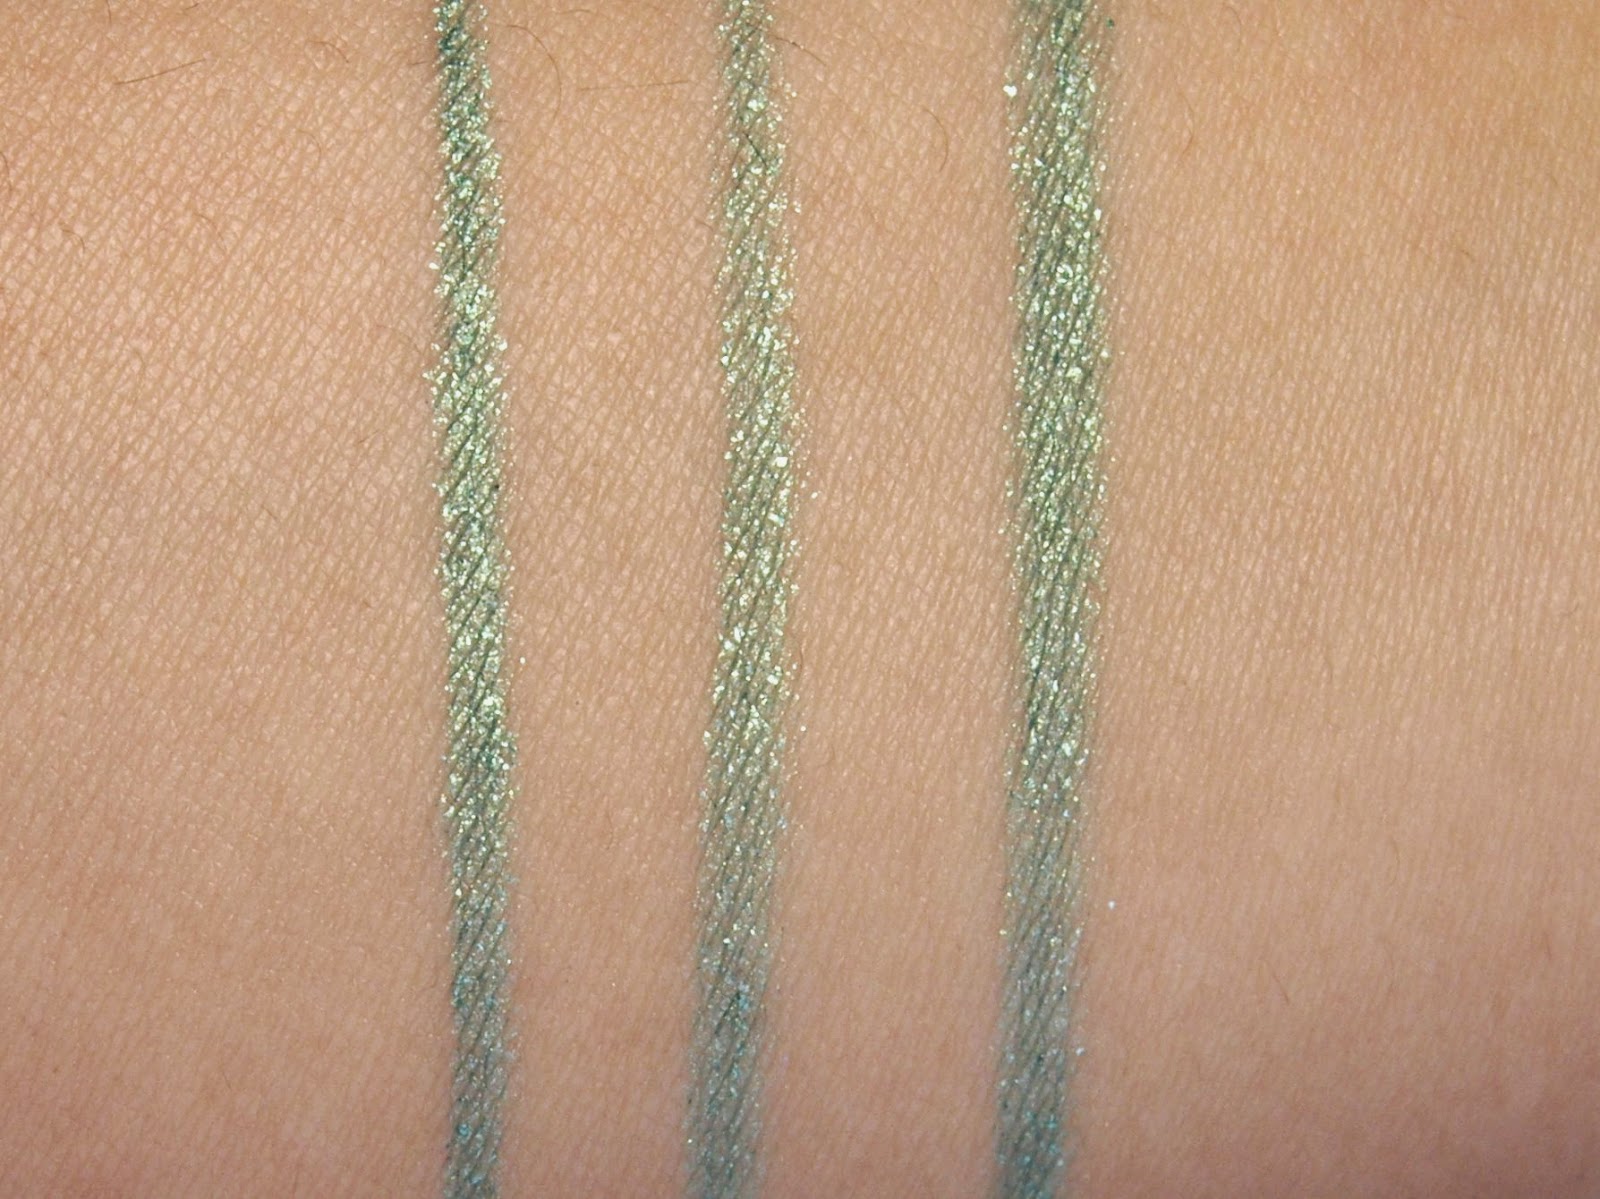 Smashbox Always Sharp 3D Liner in "3D Pacific": Review and Swatches